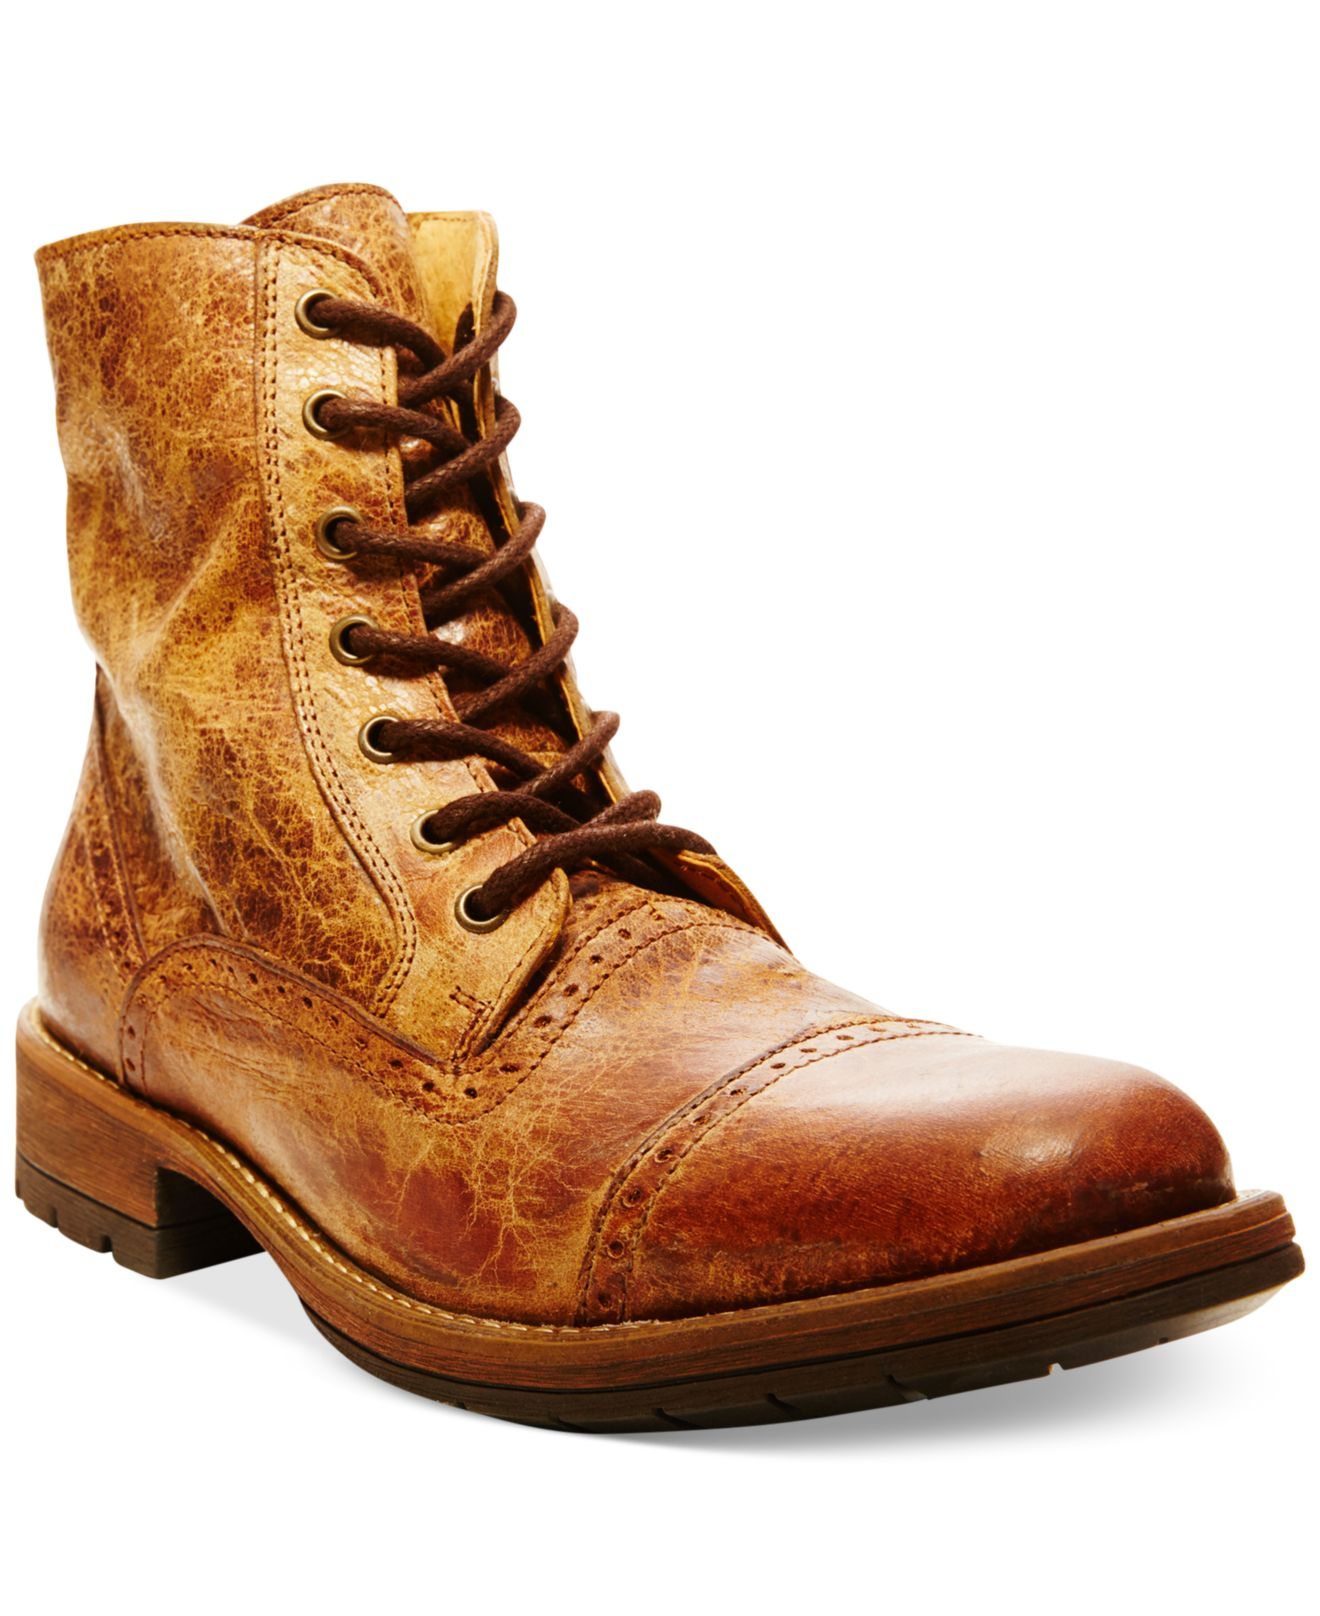 steve madden mens leather boots